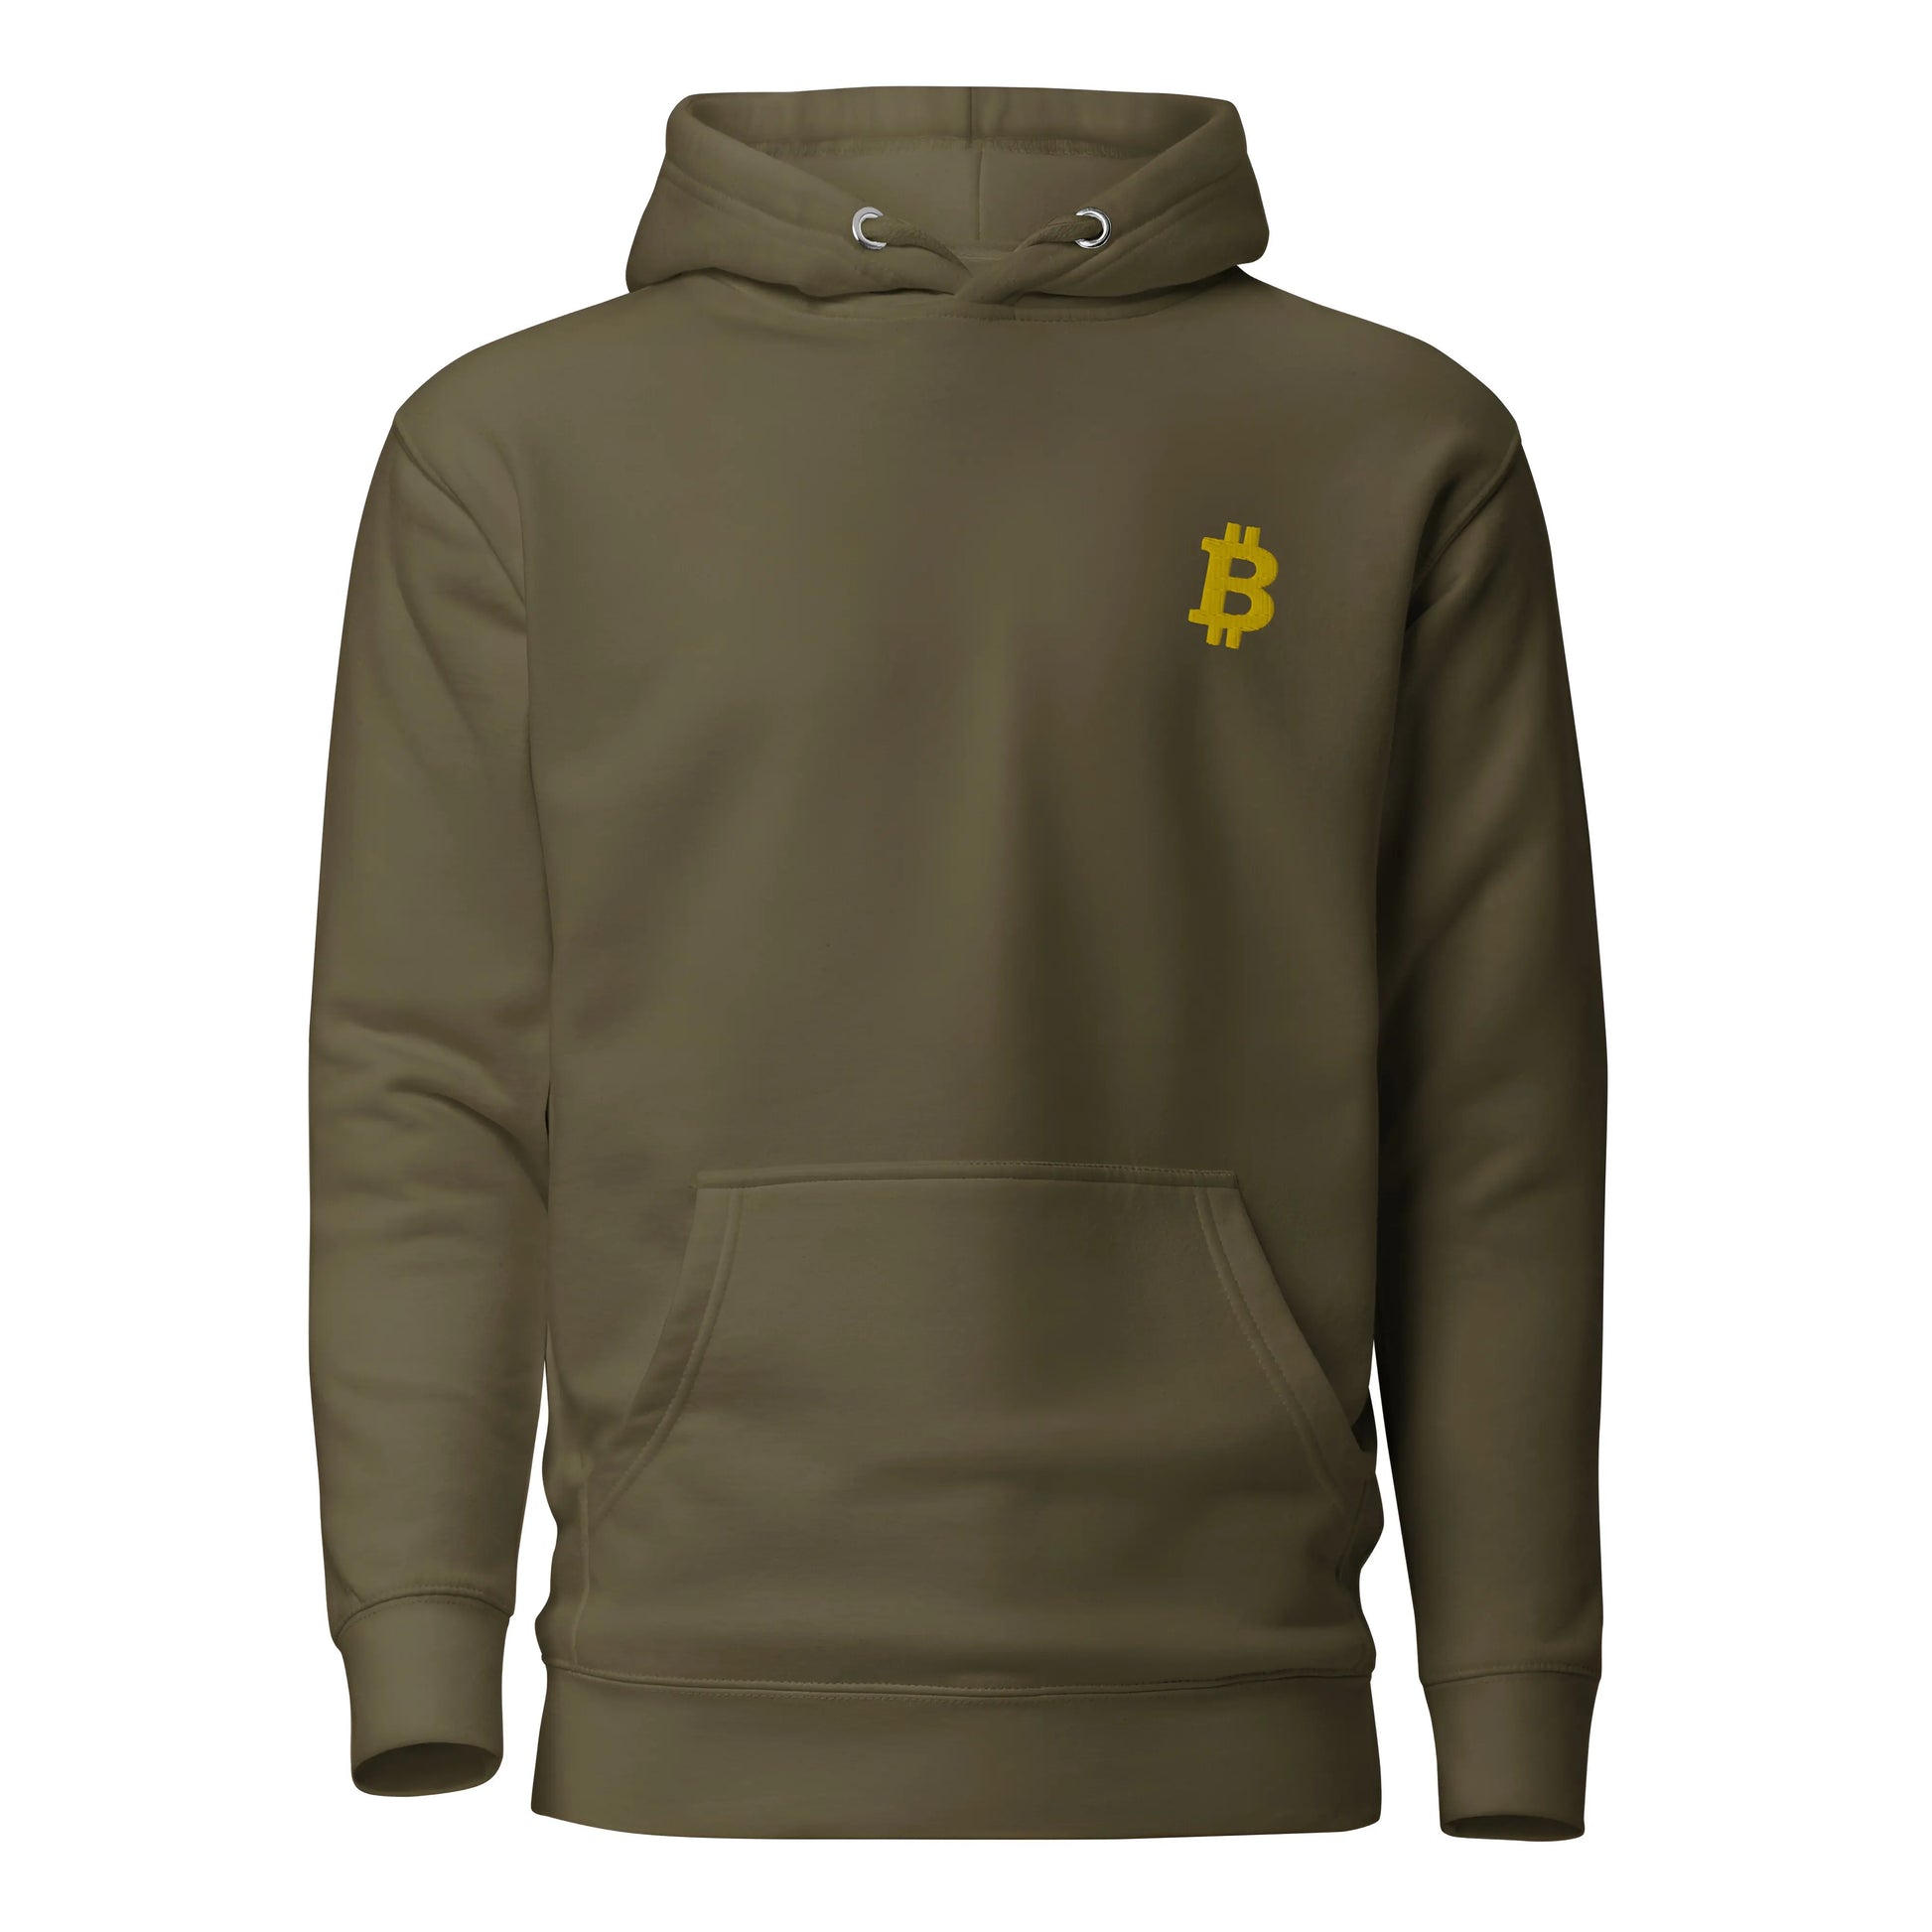 Simply Angled Bitcoin Embroidered - Premium Unisex Bitcoin Hoodie Gold Military Green Color